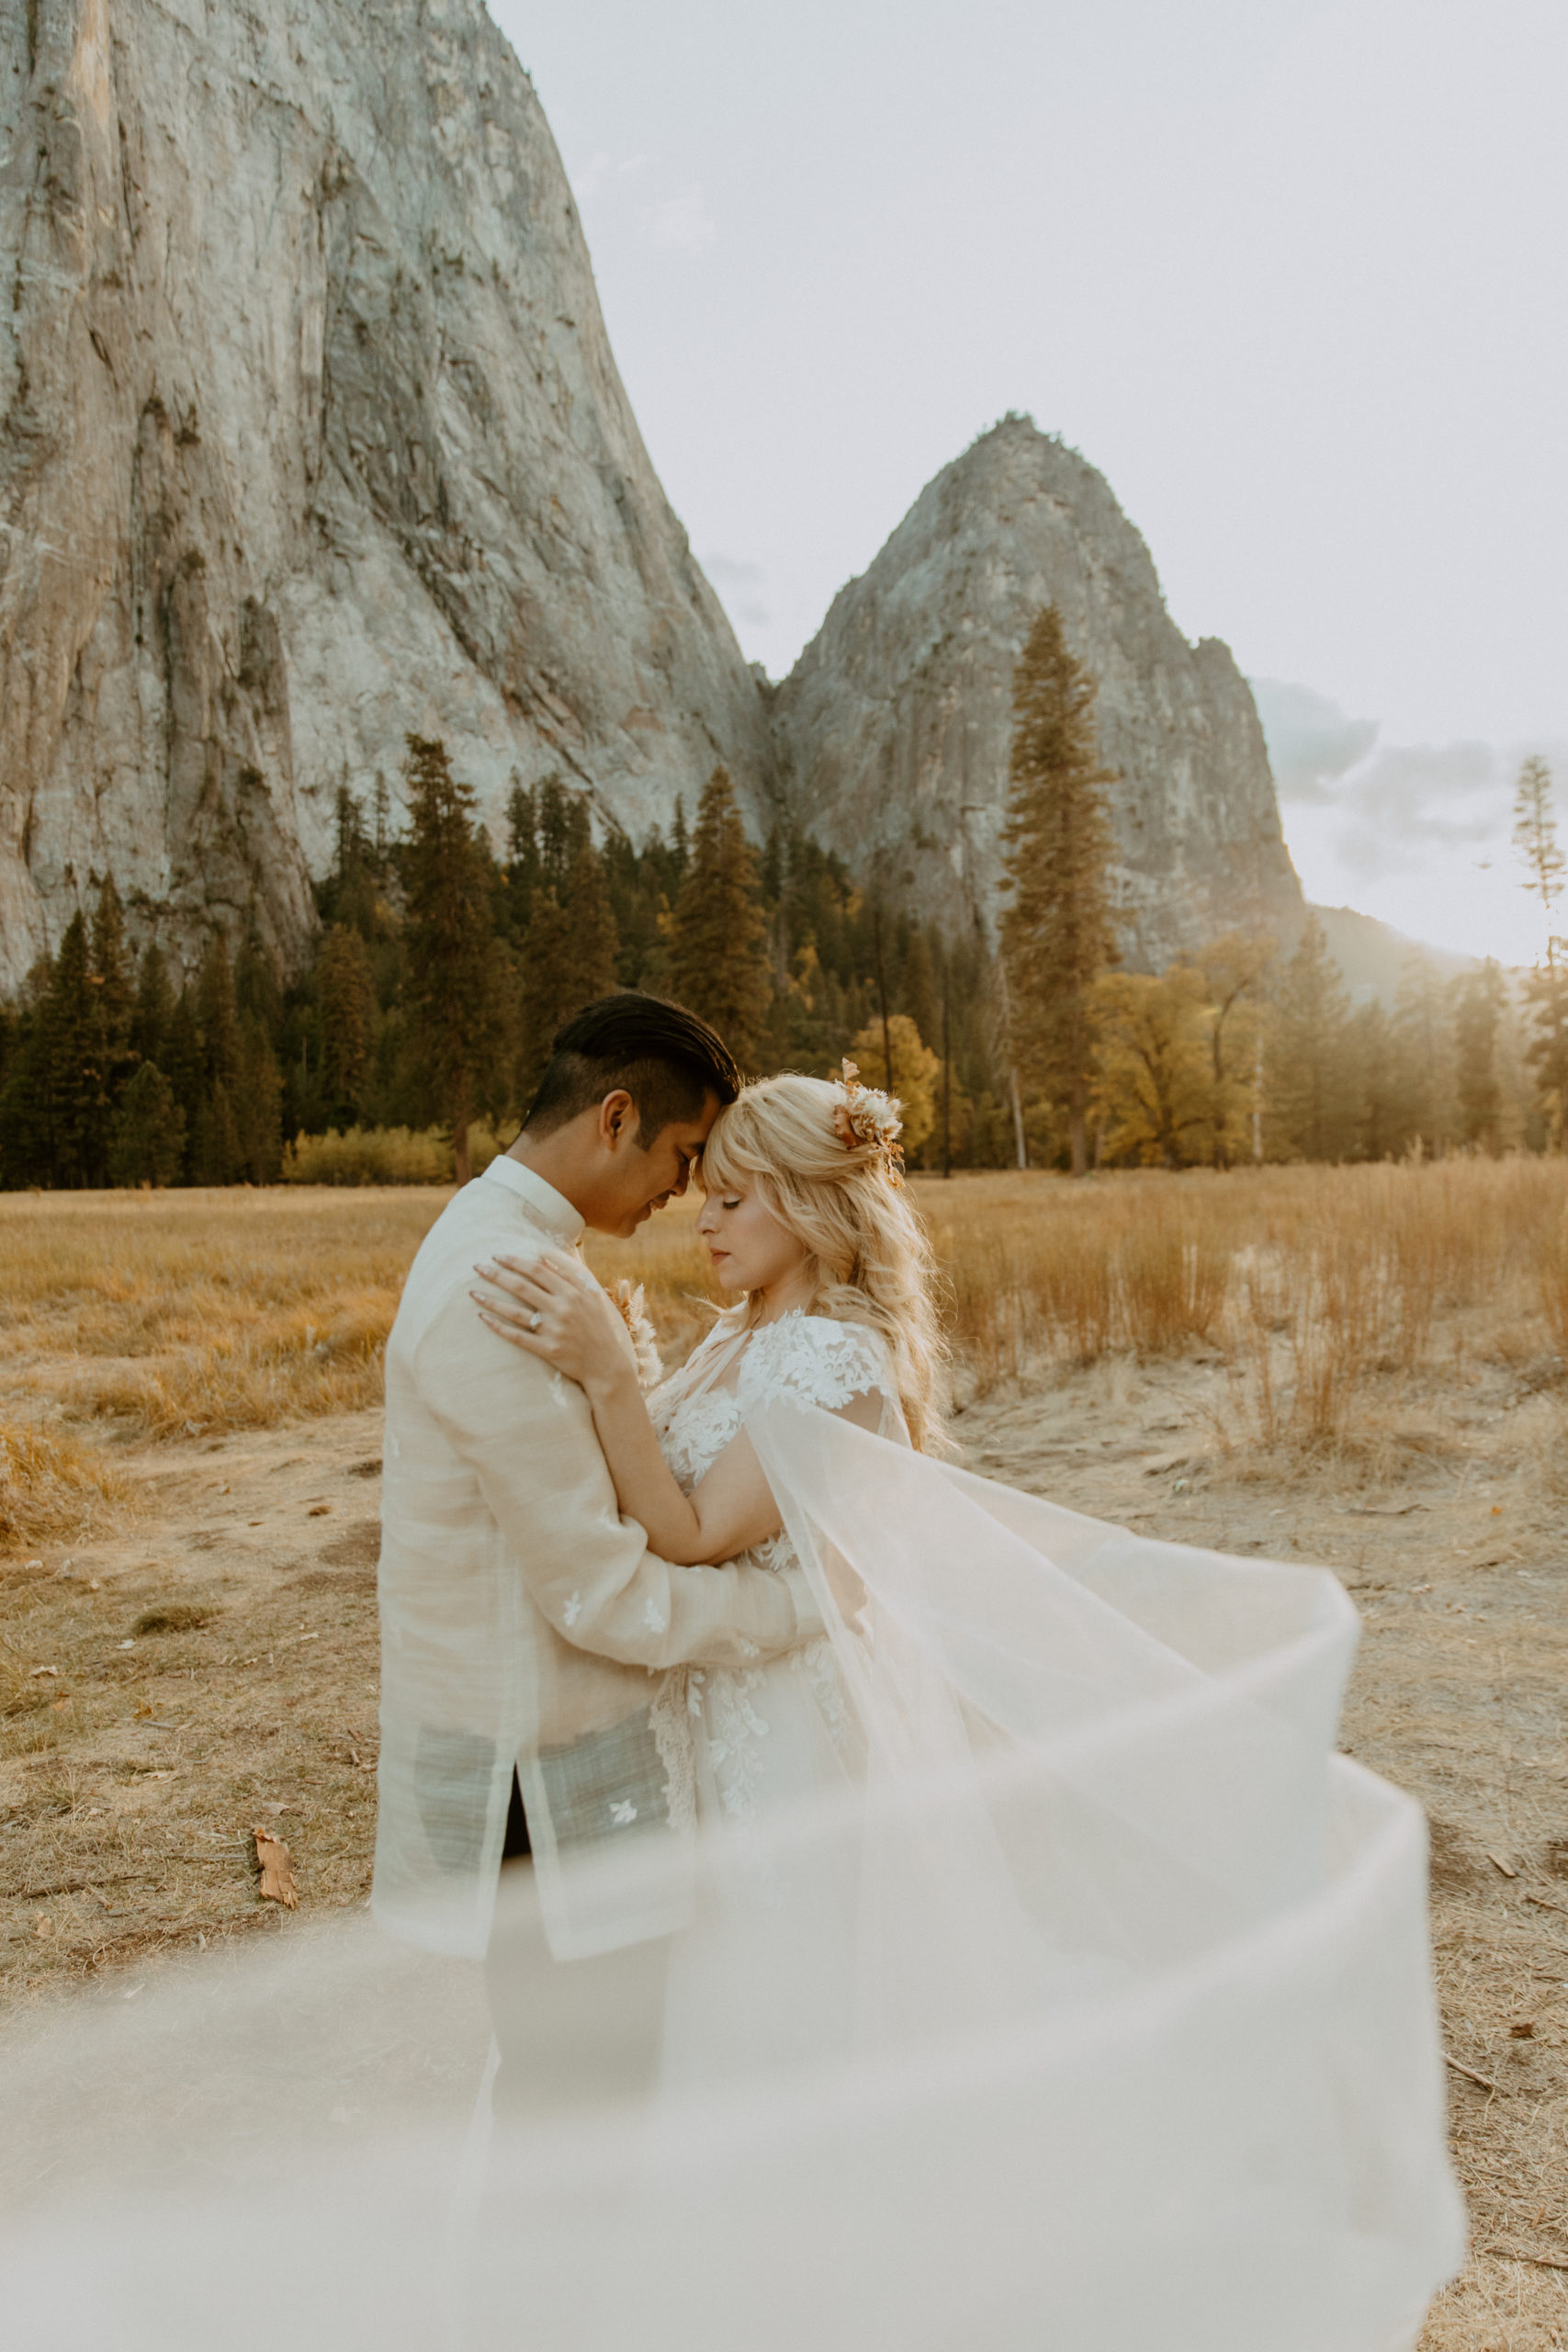 the couple touching foreheads with her veil blowing in the wind